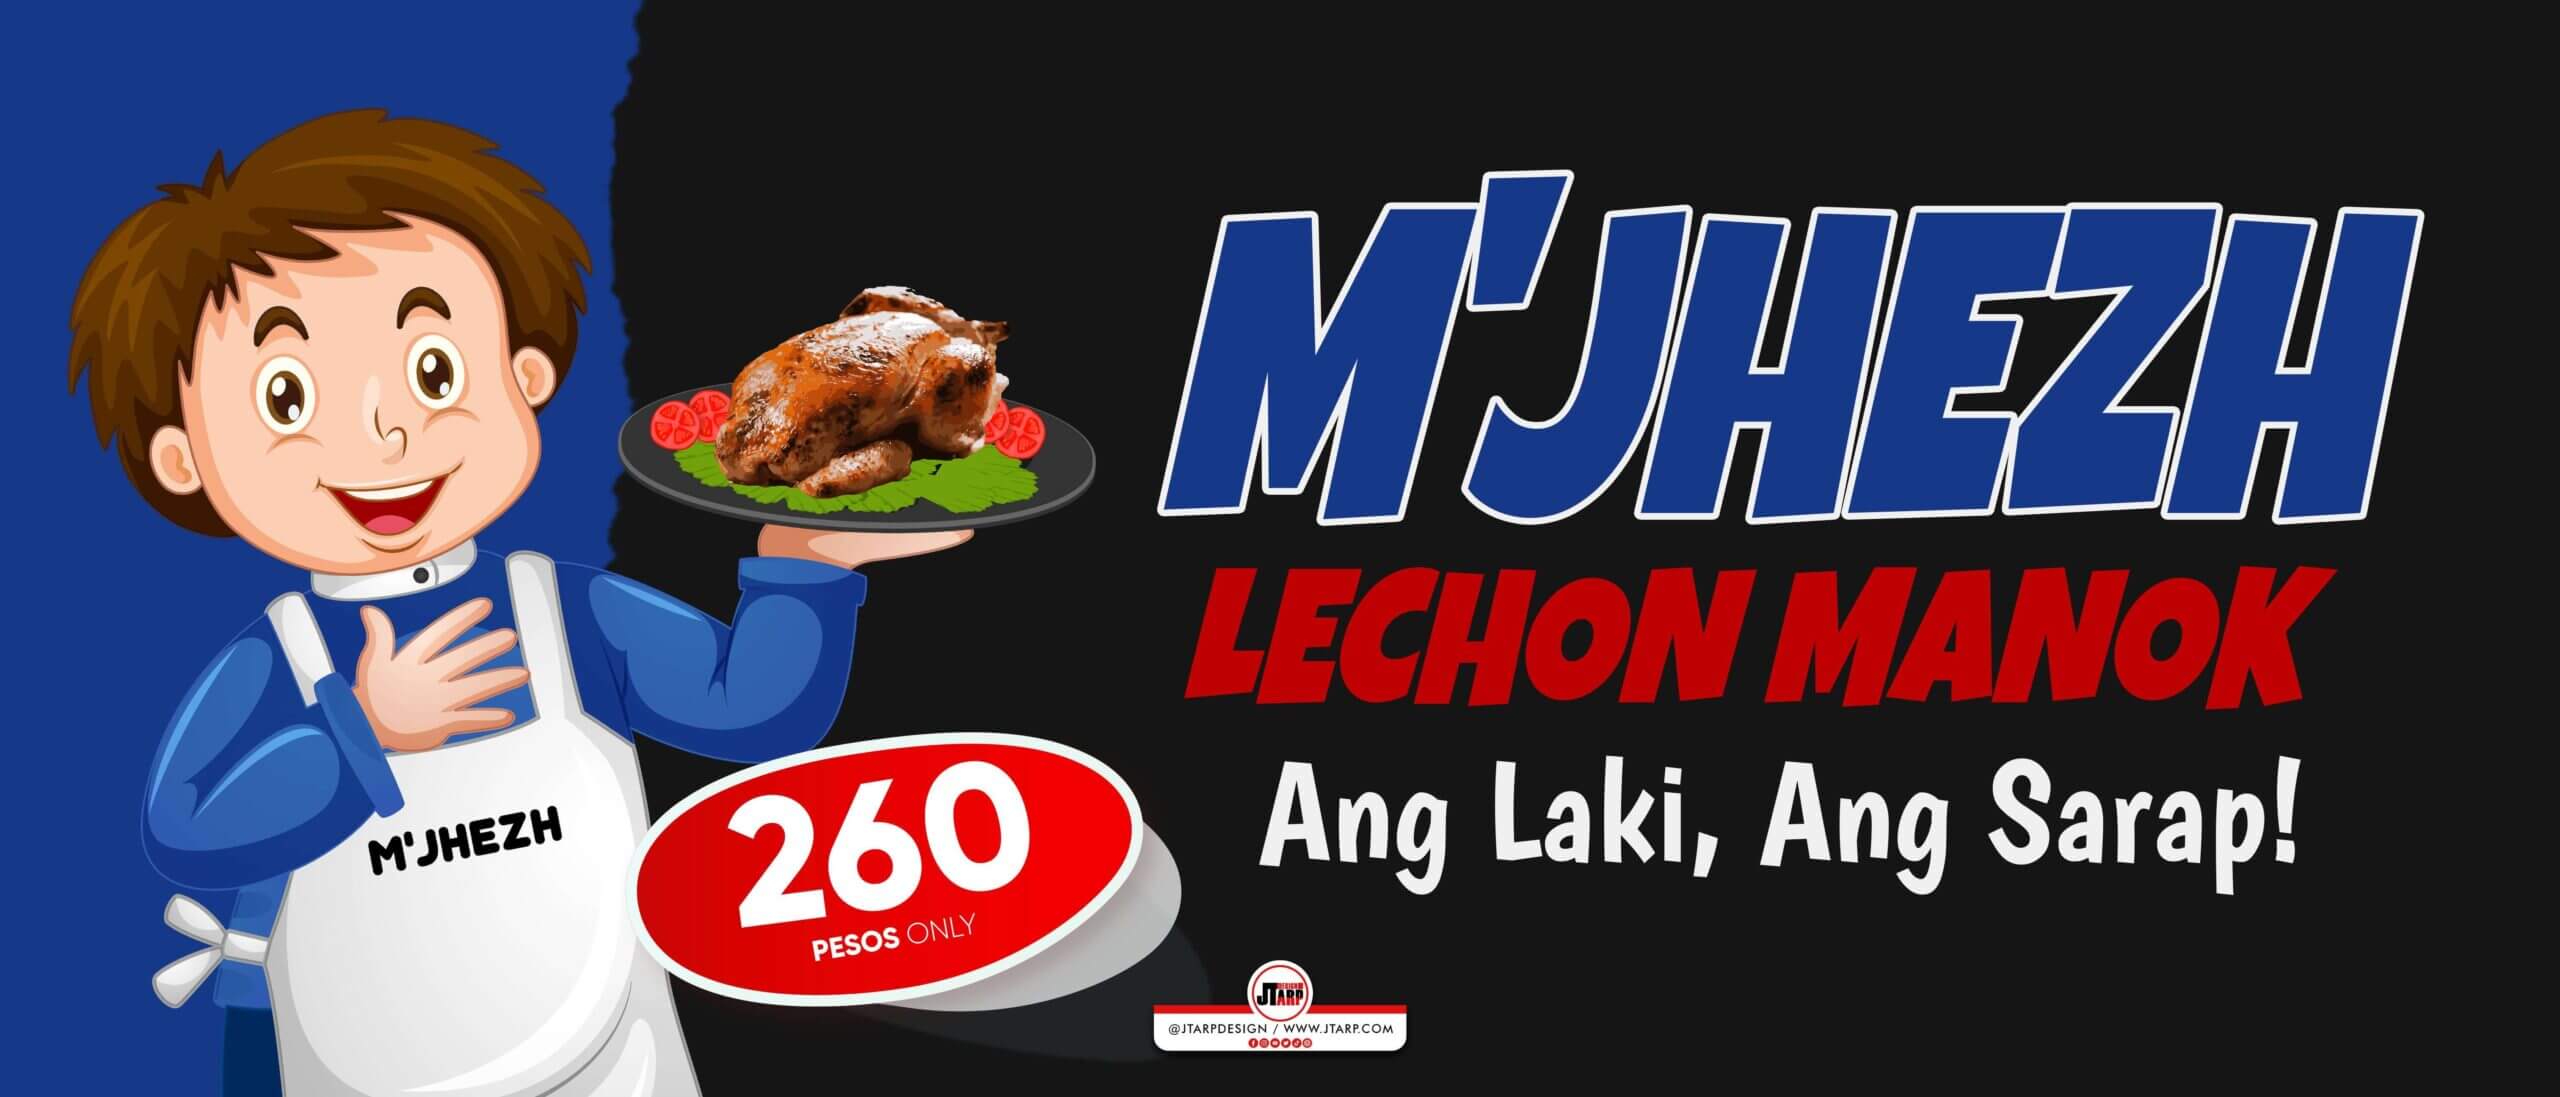 7x3 M jhezh Lechon Manok Banner for Top of Store